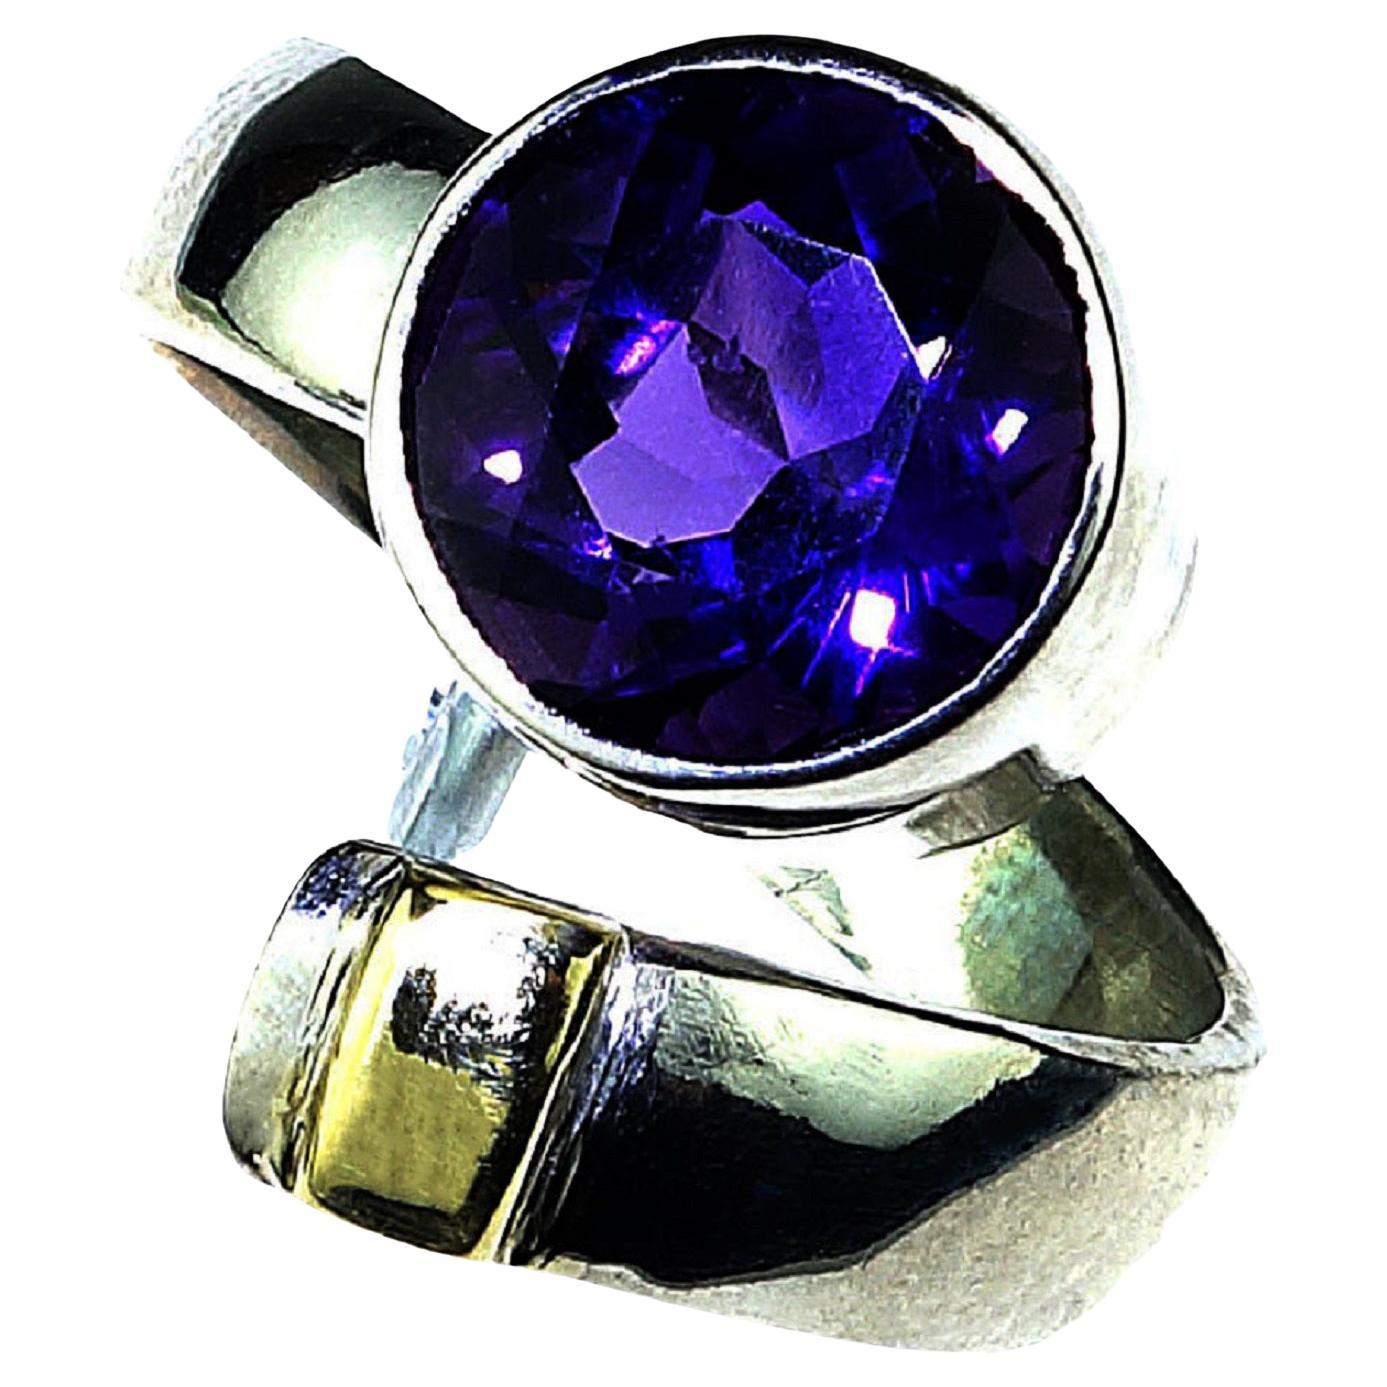 Handmade Sterling Silver and Amethyst Ring. Pinky finger delight! This lovely ring caresses your pinky with its deep purple, round amethyst focal point bezel set in sterling silver to the tip of 14K yellow gold to enhance the purple.  It was